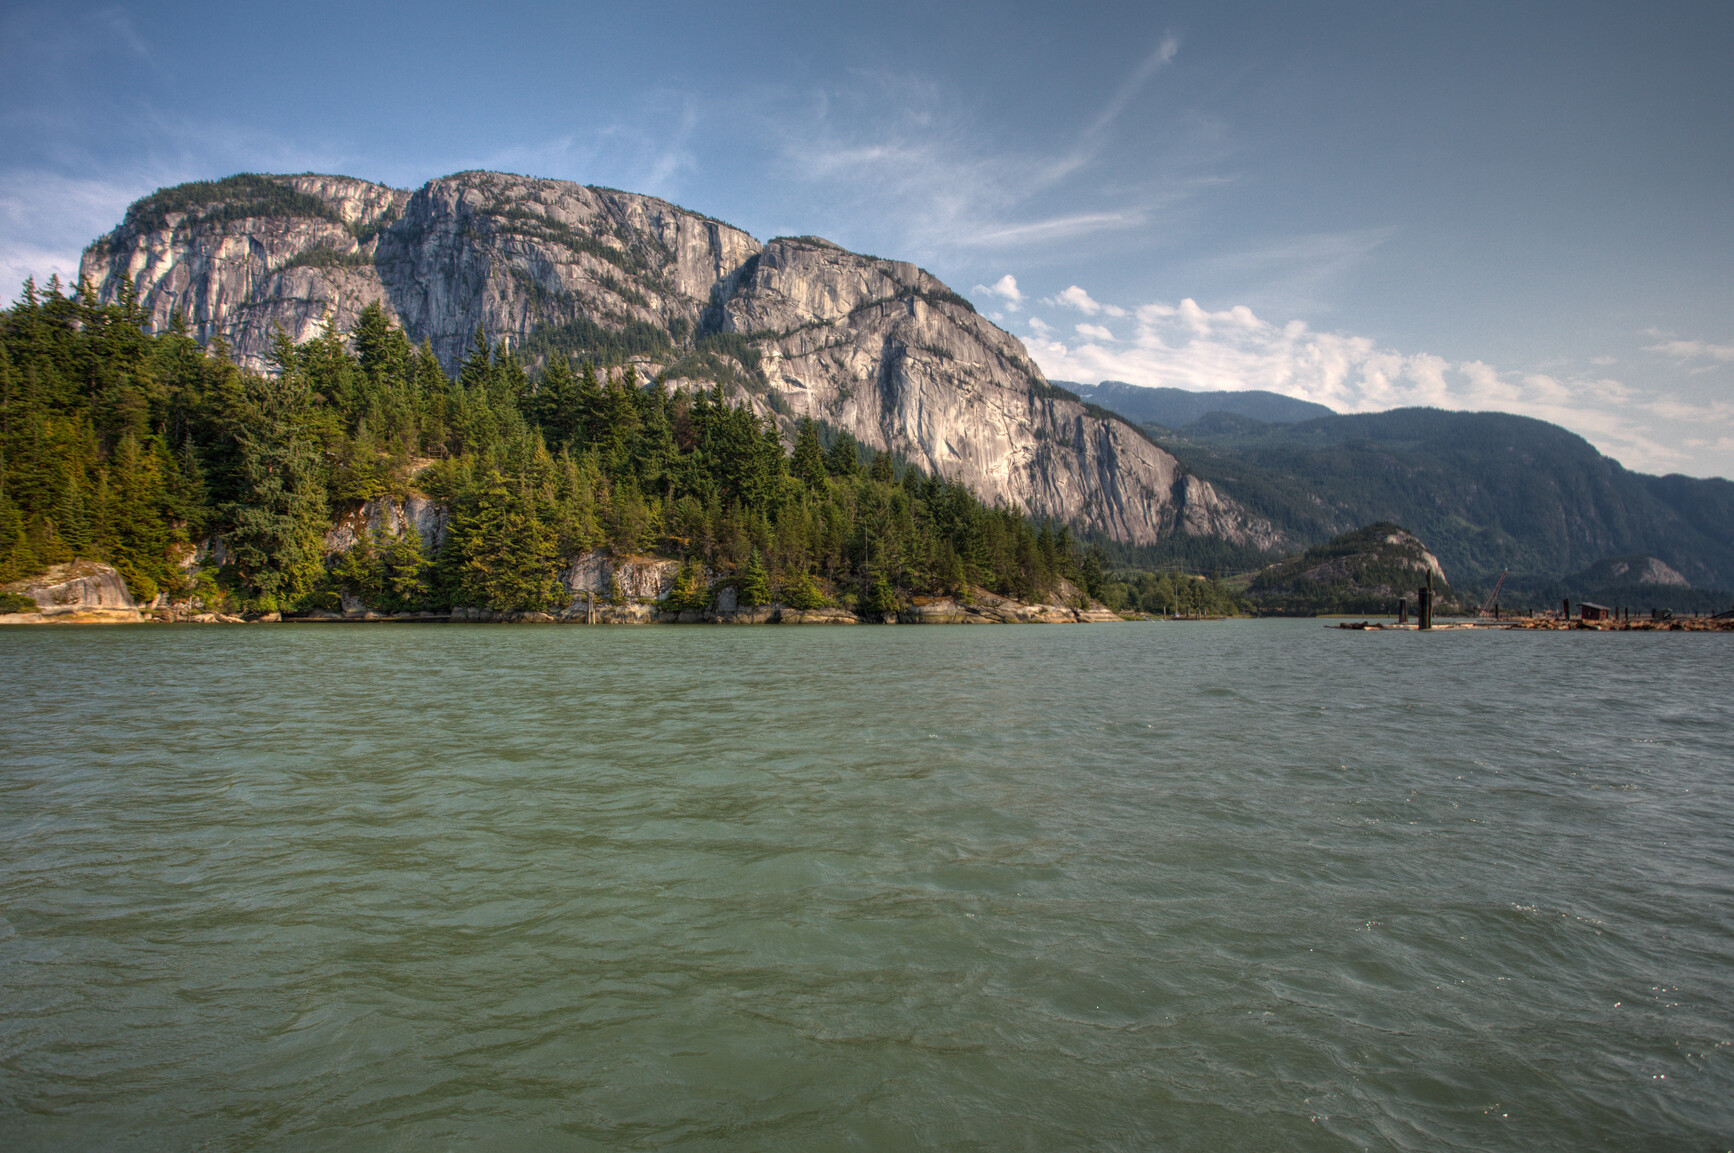 View of Stawamus Chief from Howe Sound.